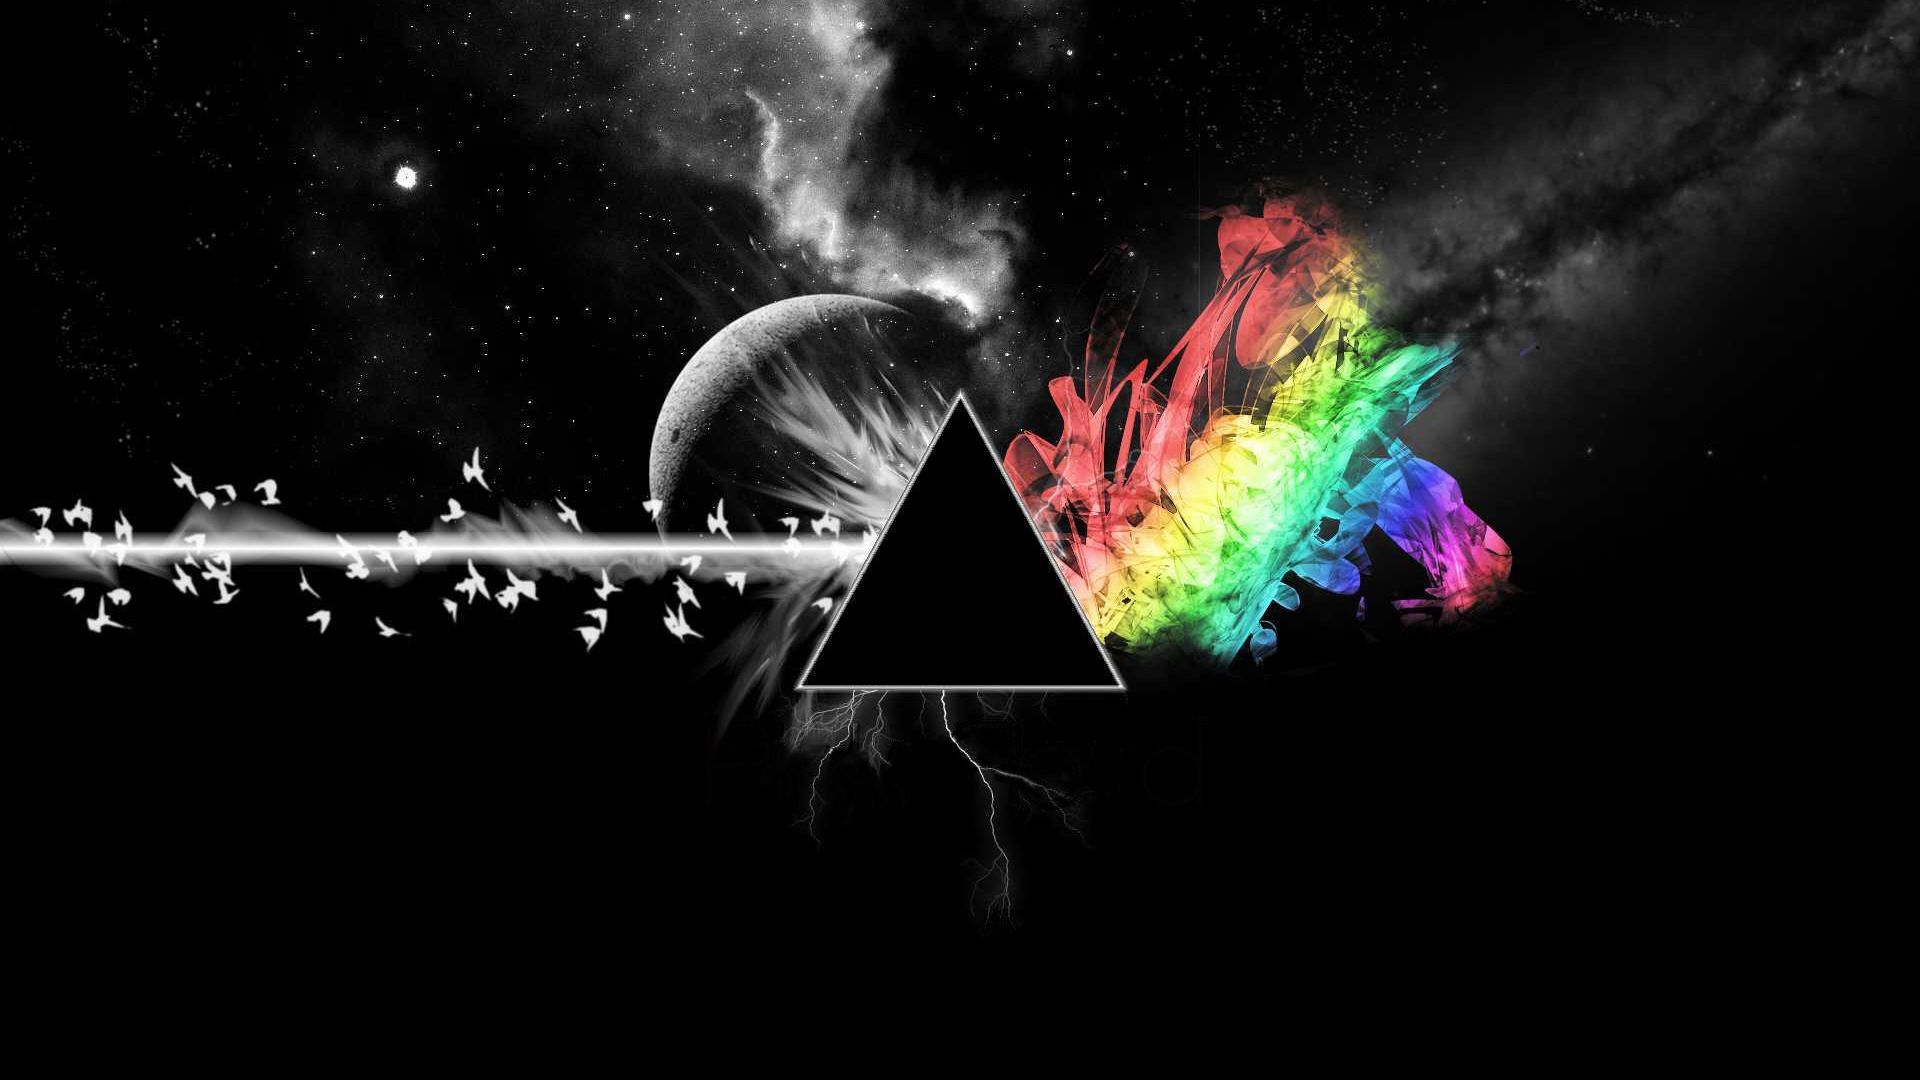 The Dark Side of the Moon Wallpaper - MixHD wallpapers